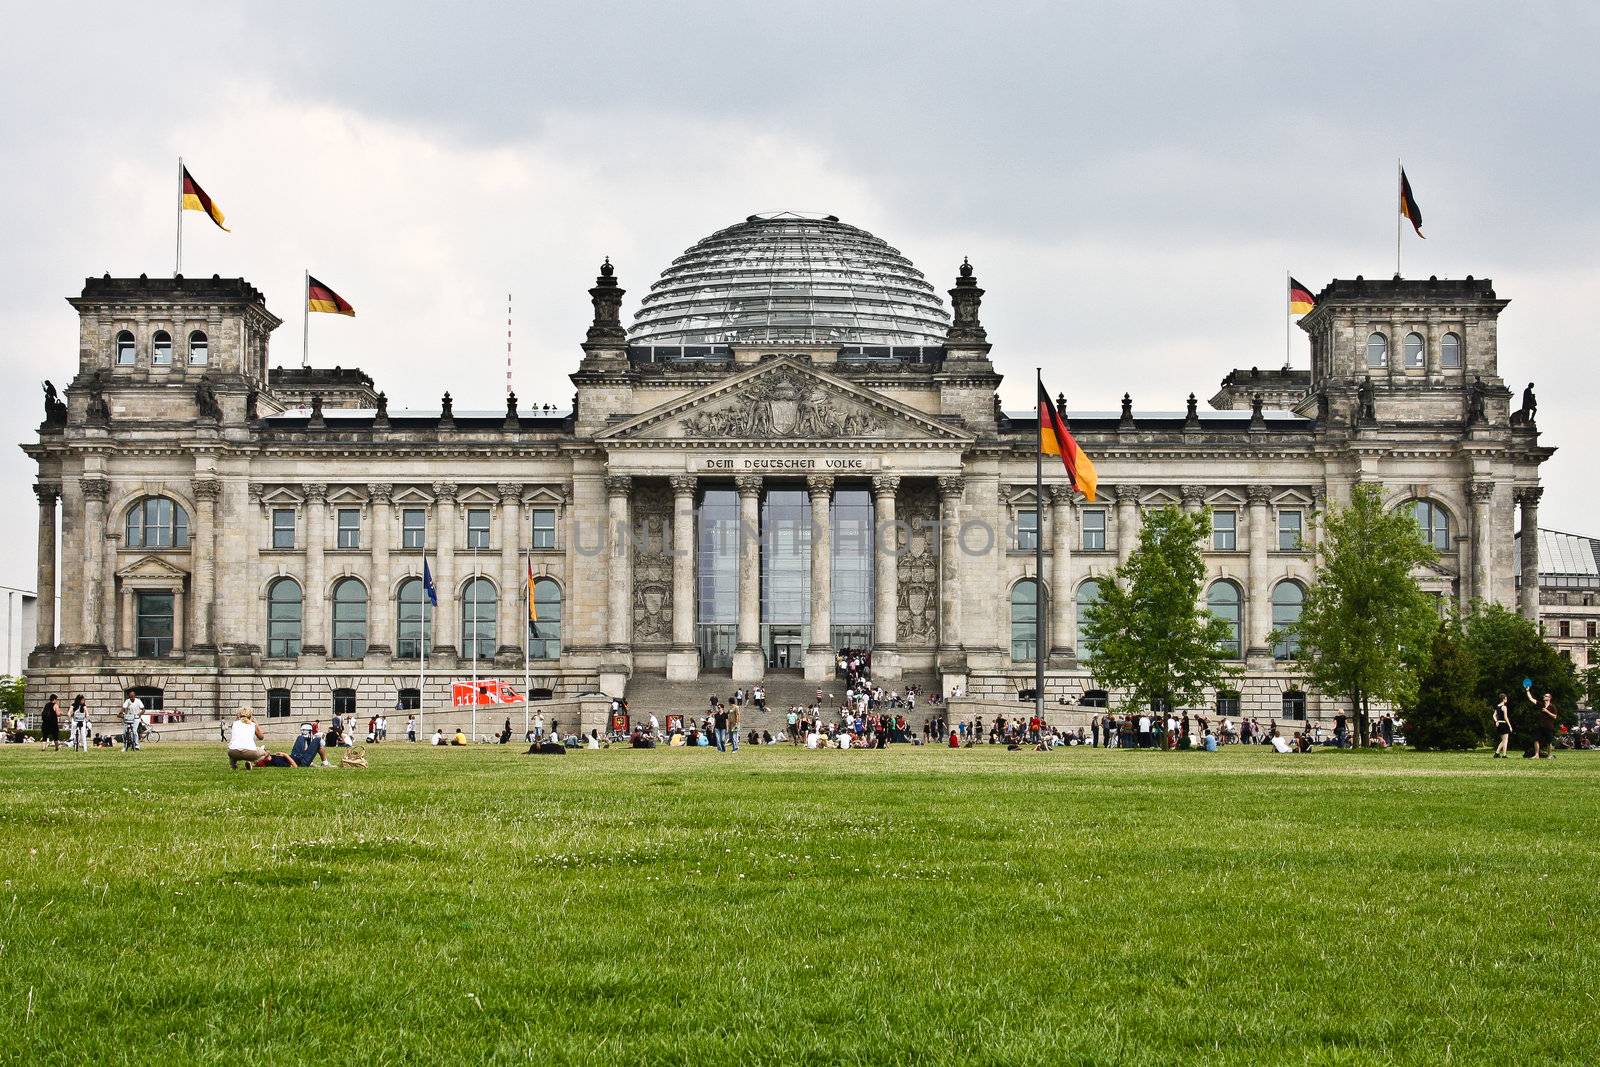 The Reichstag building from 1894 in Berlin, Germany